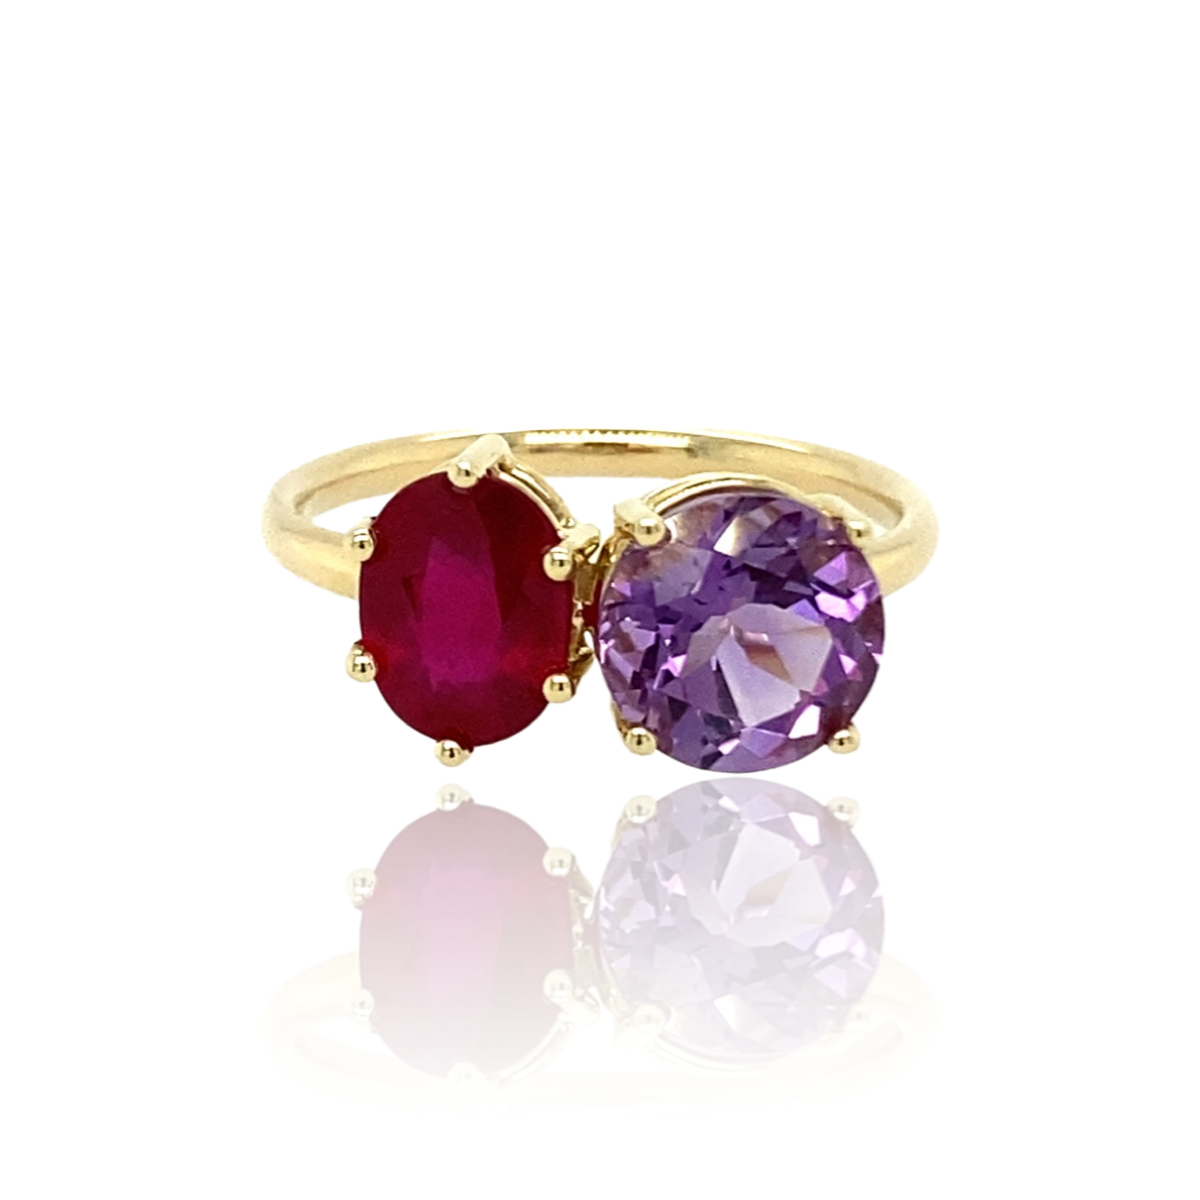 Toi et Moi ring with Ruby and Amethyst in 14k yellow gold